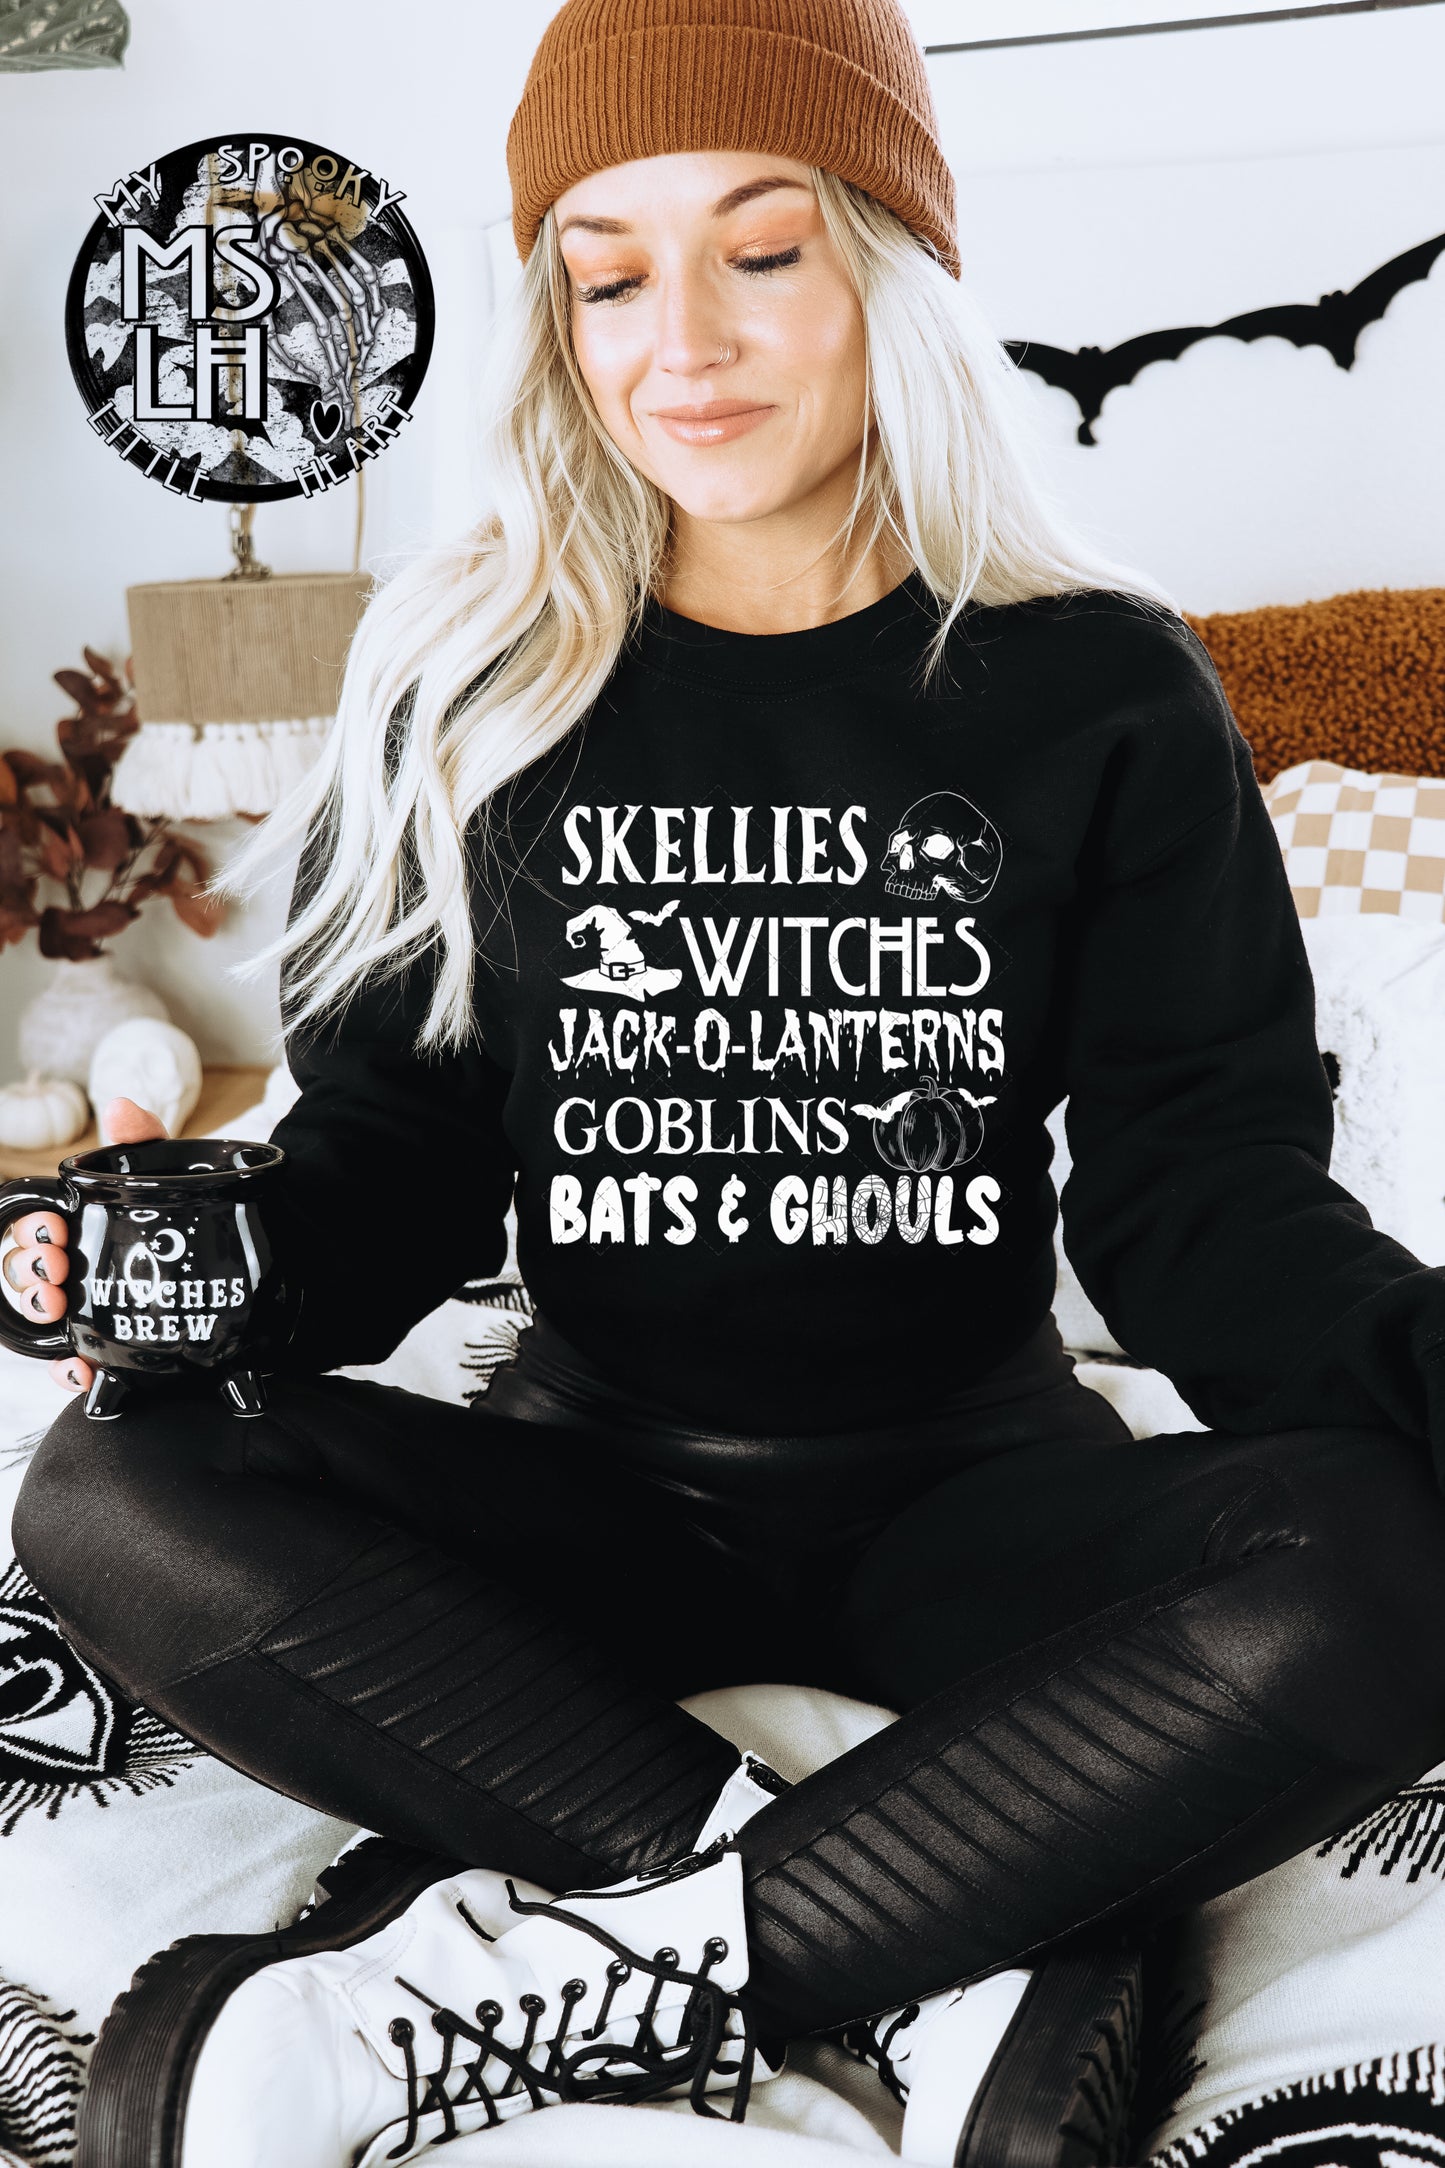 Halloween, Skellies Witches, Jack -o Lanterns, Goblins, Bats & Ghouls